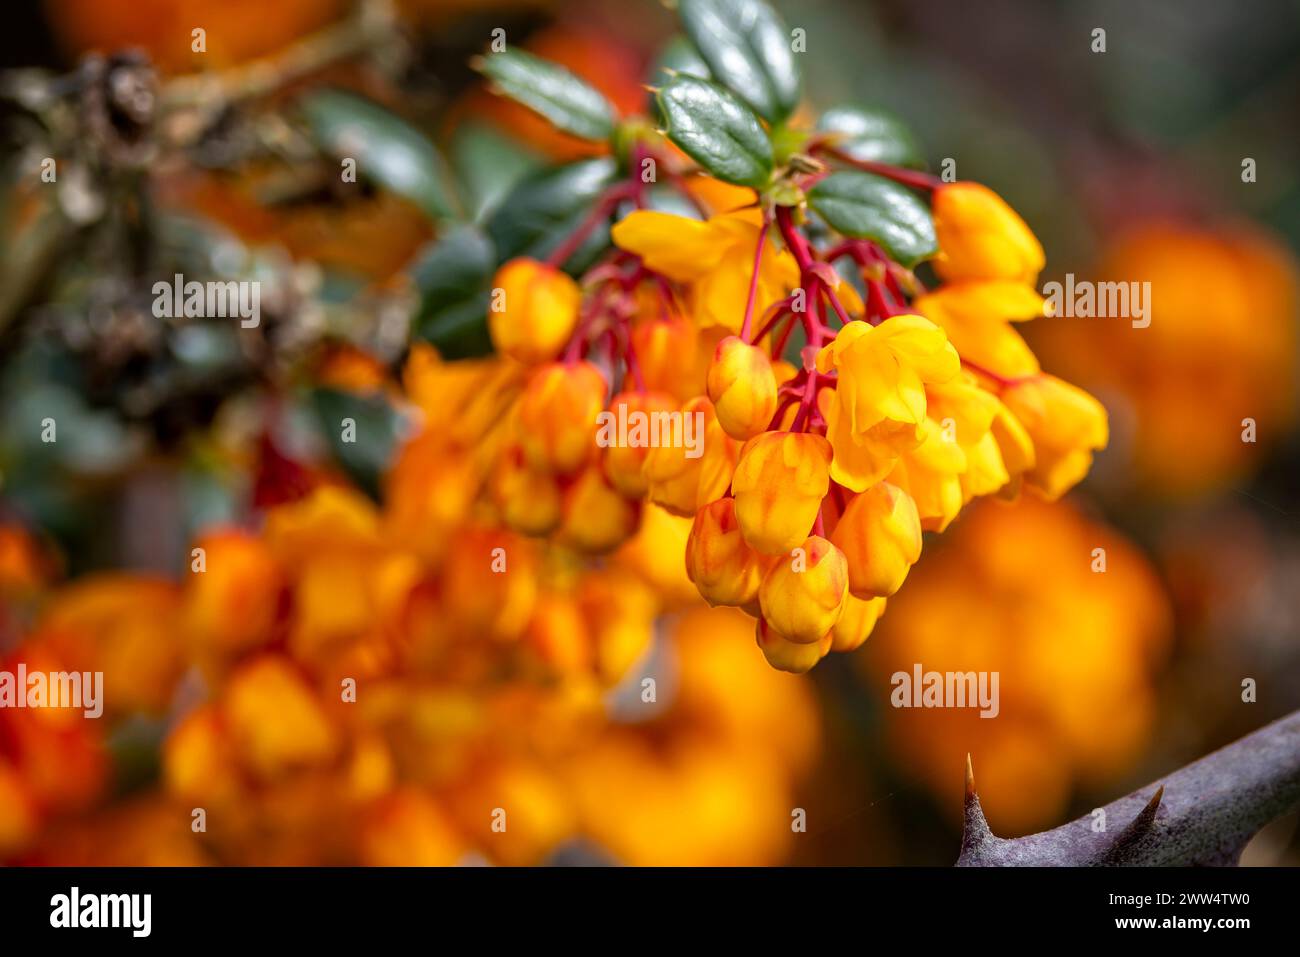 Close up of a cluster of bright yellow-orange flowers with red stems on Berberis Darwinii evergreen shrub Stock Photo